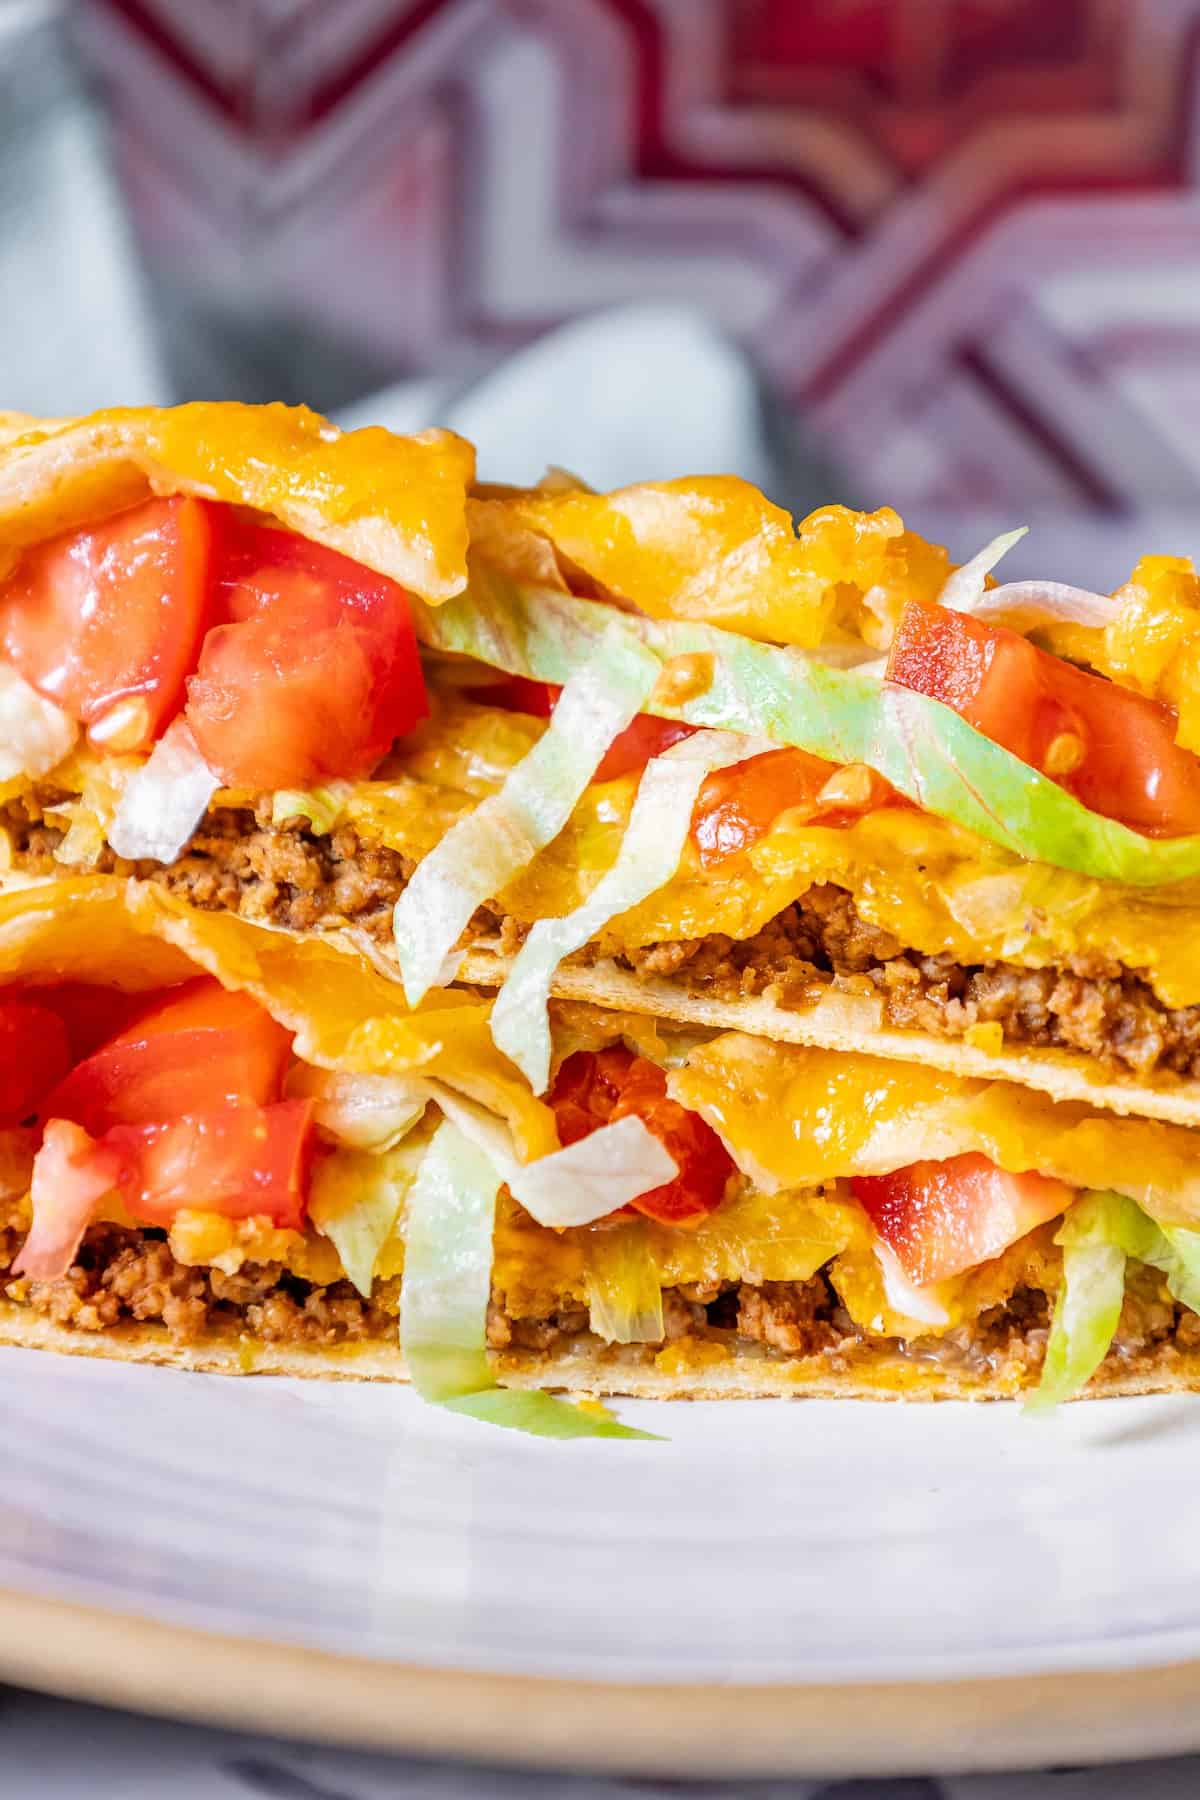 A stack of CrunchWrap tacos on a plate with tomatoes and lettuce.